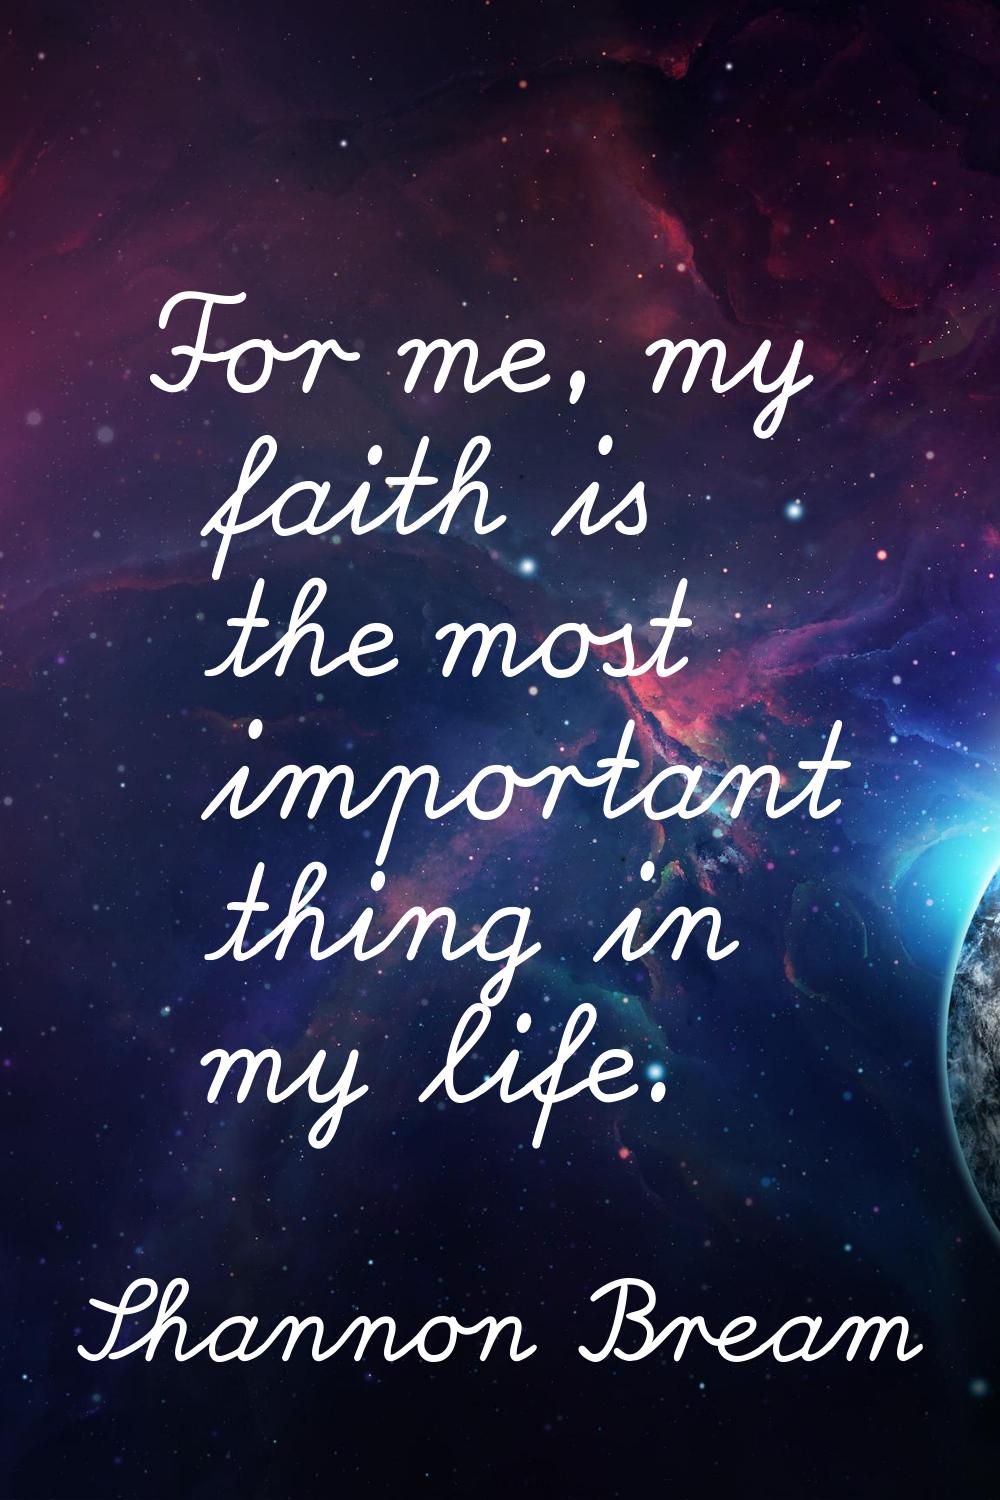 For me, my faith is the most important thing in my life.